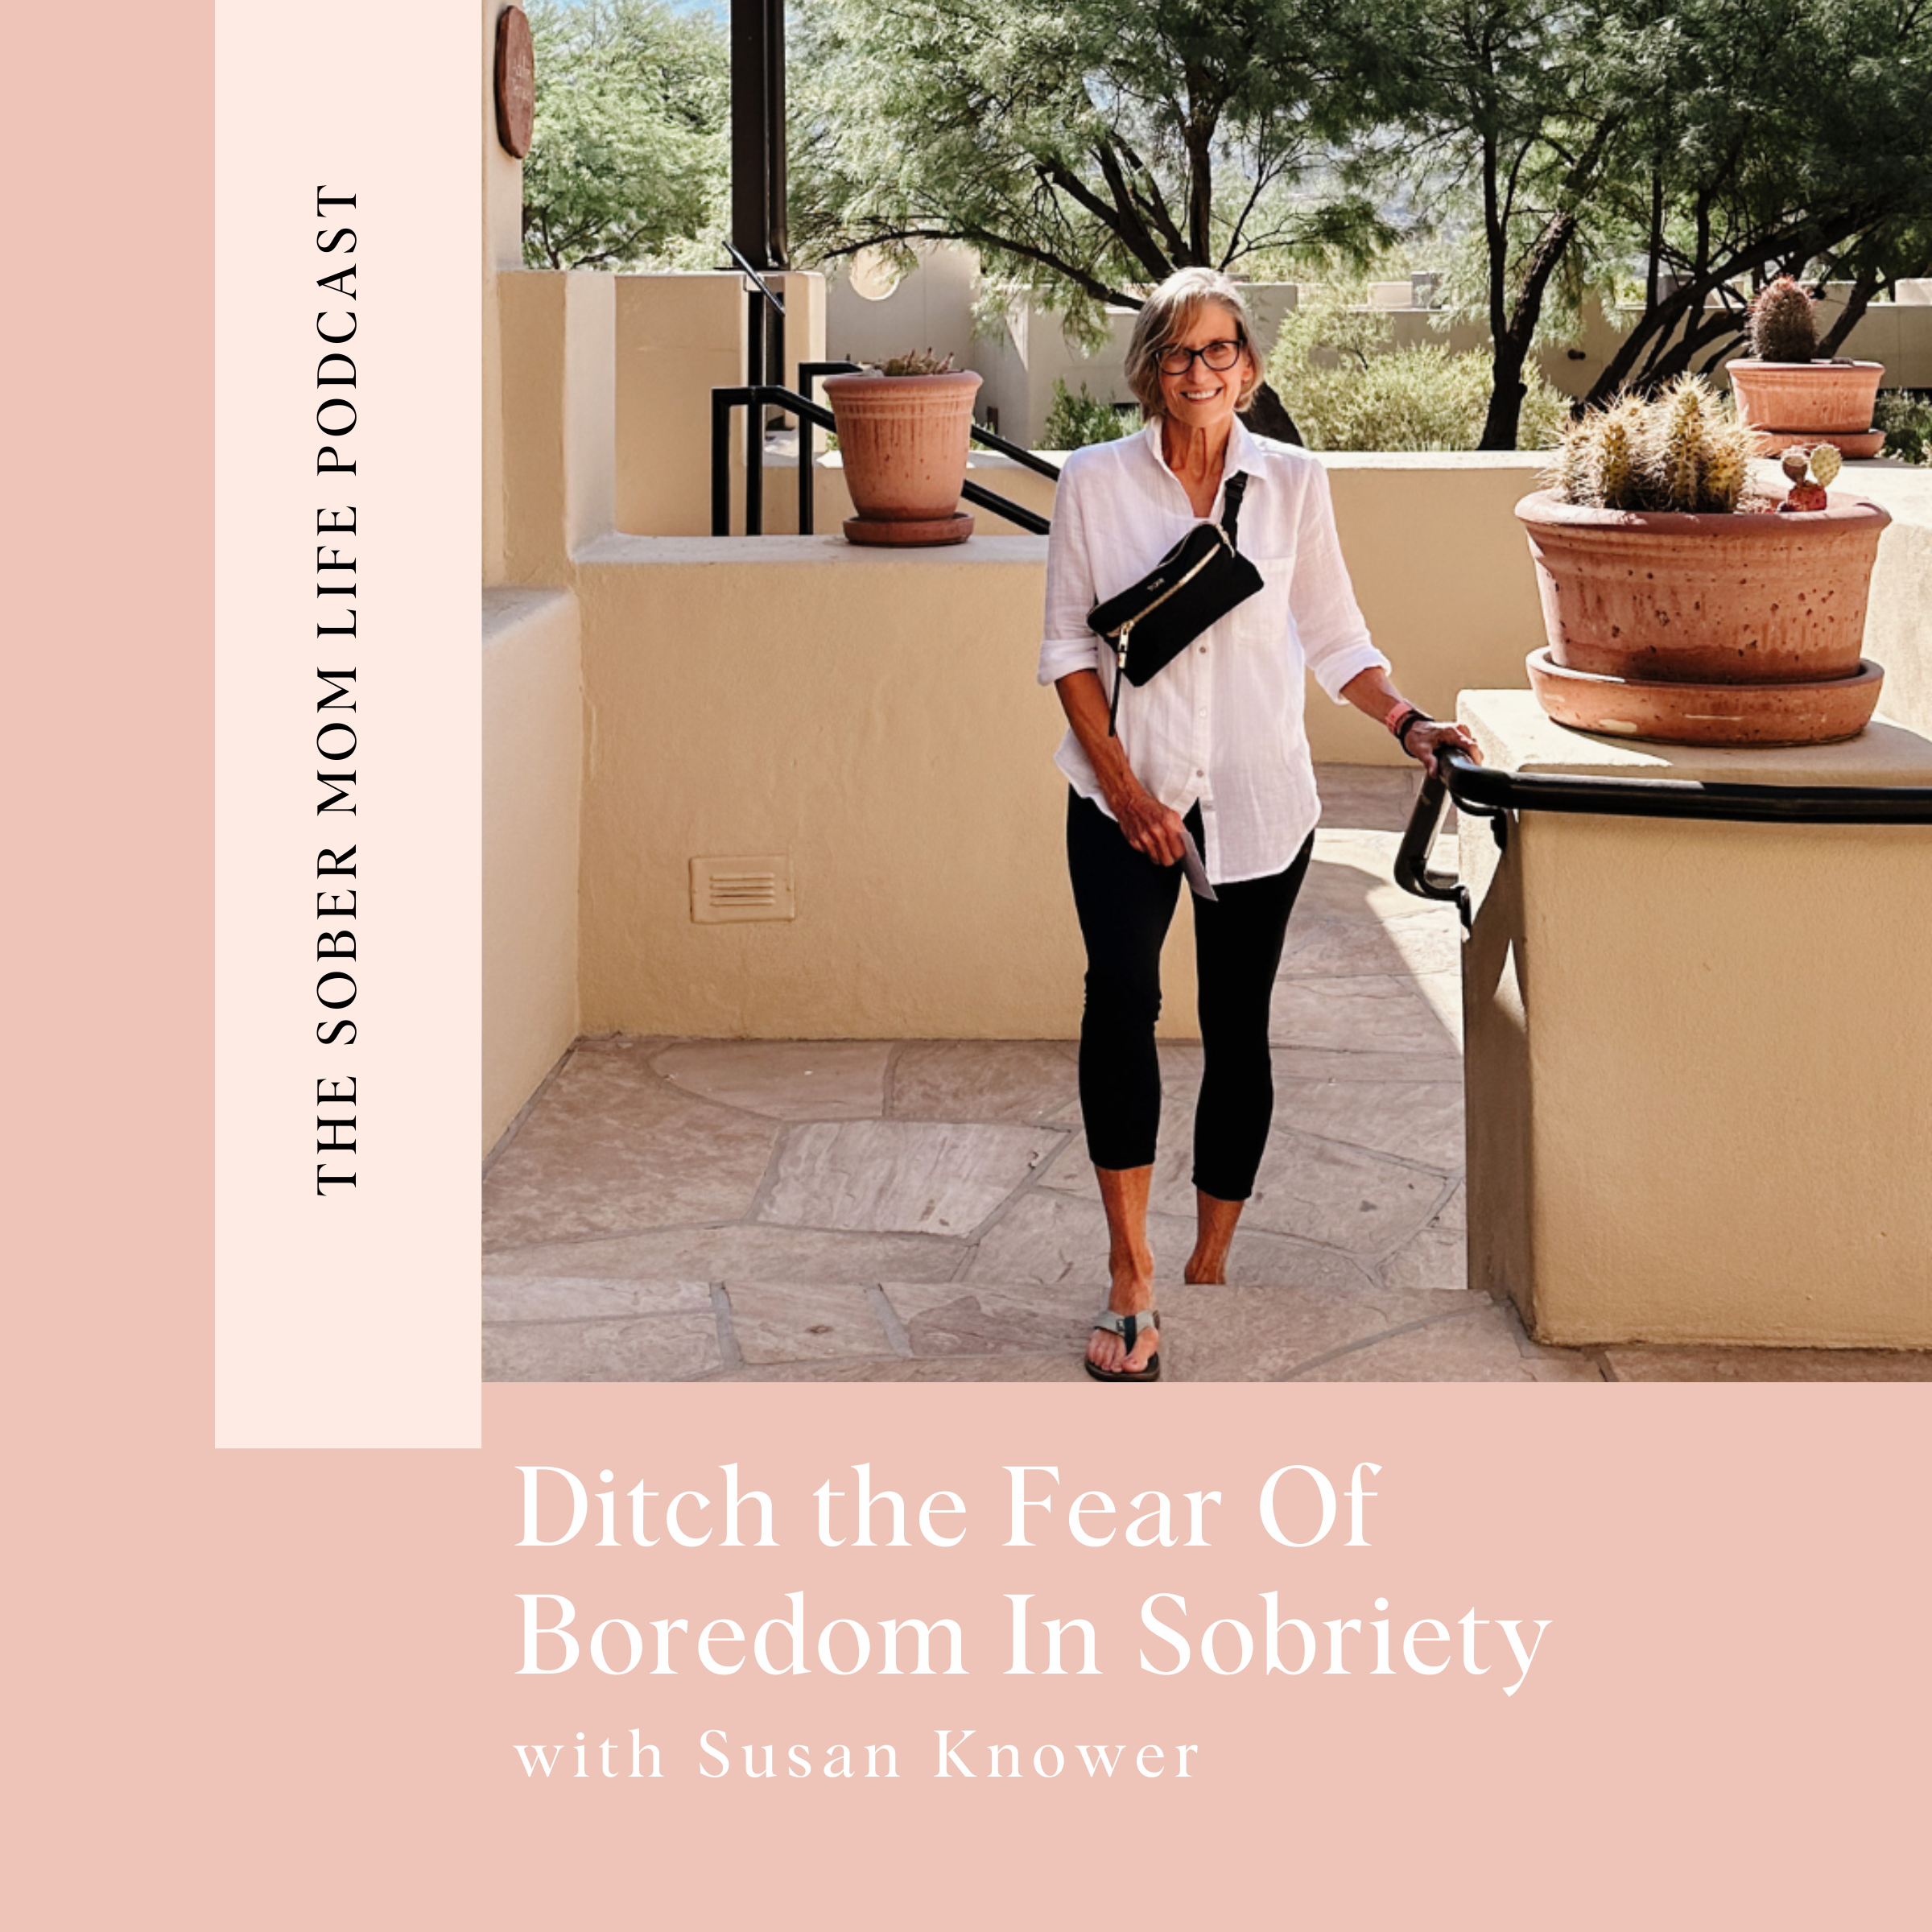 Ditch the Fear of Boredom in Sobriety with Susan Knower